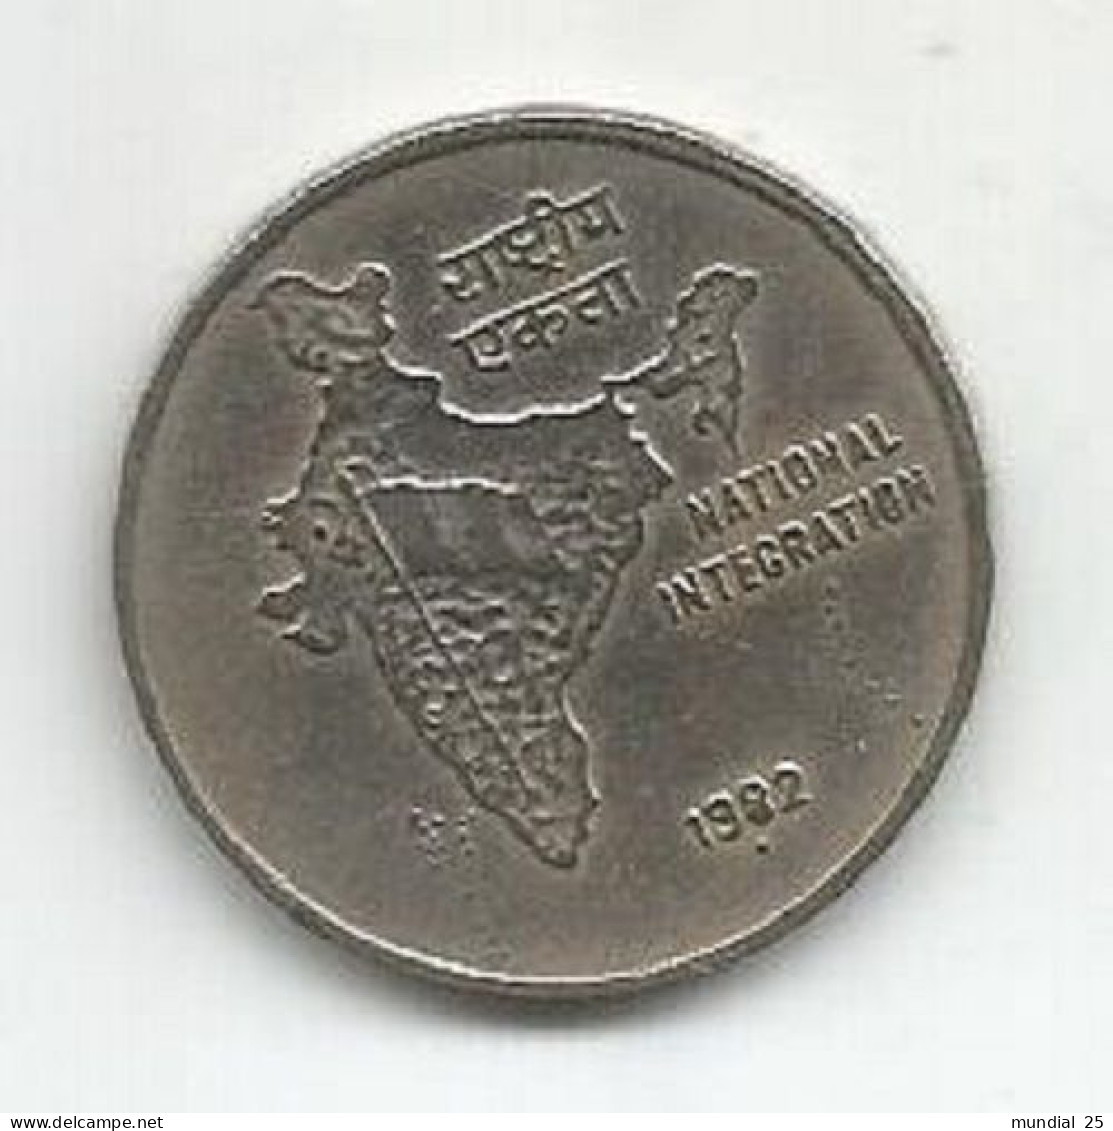 INDIA 50 PAISE 1982 - NATIONAL INTEGRATION - Inde